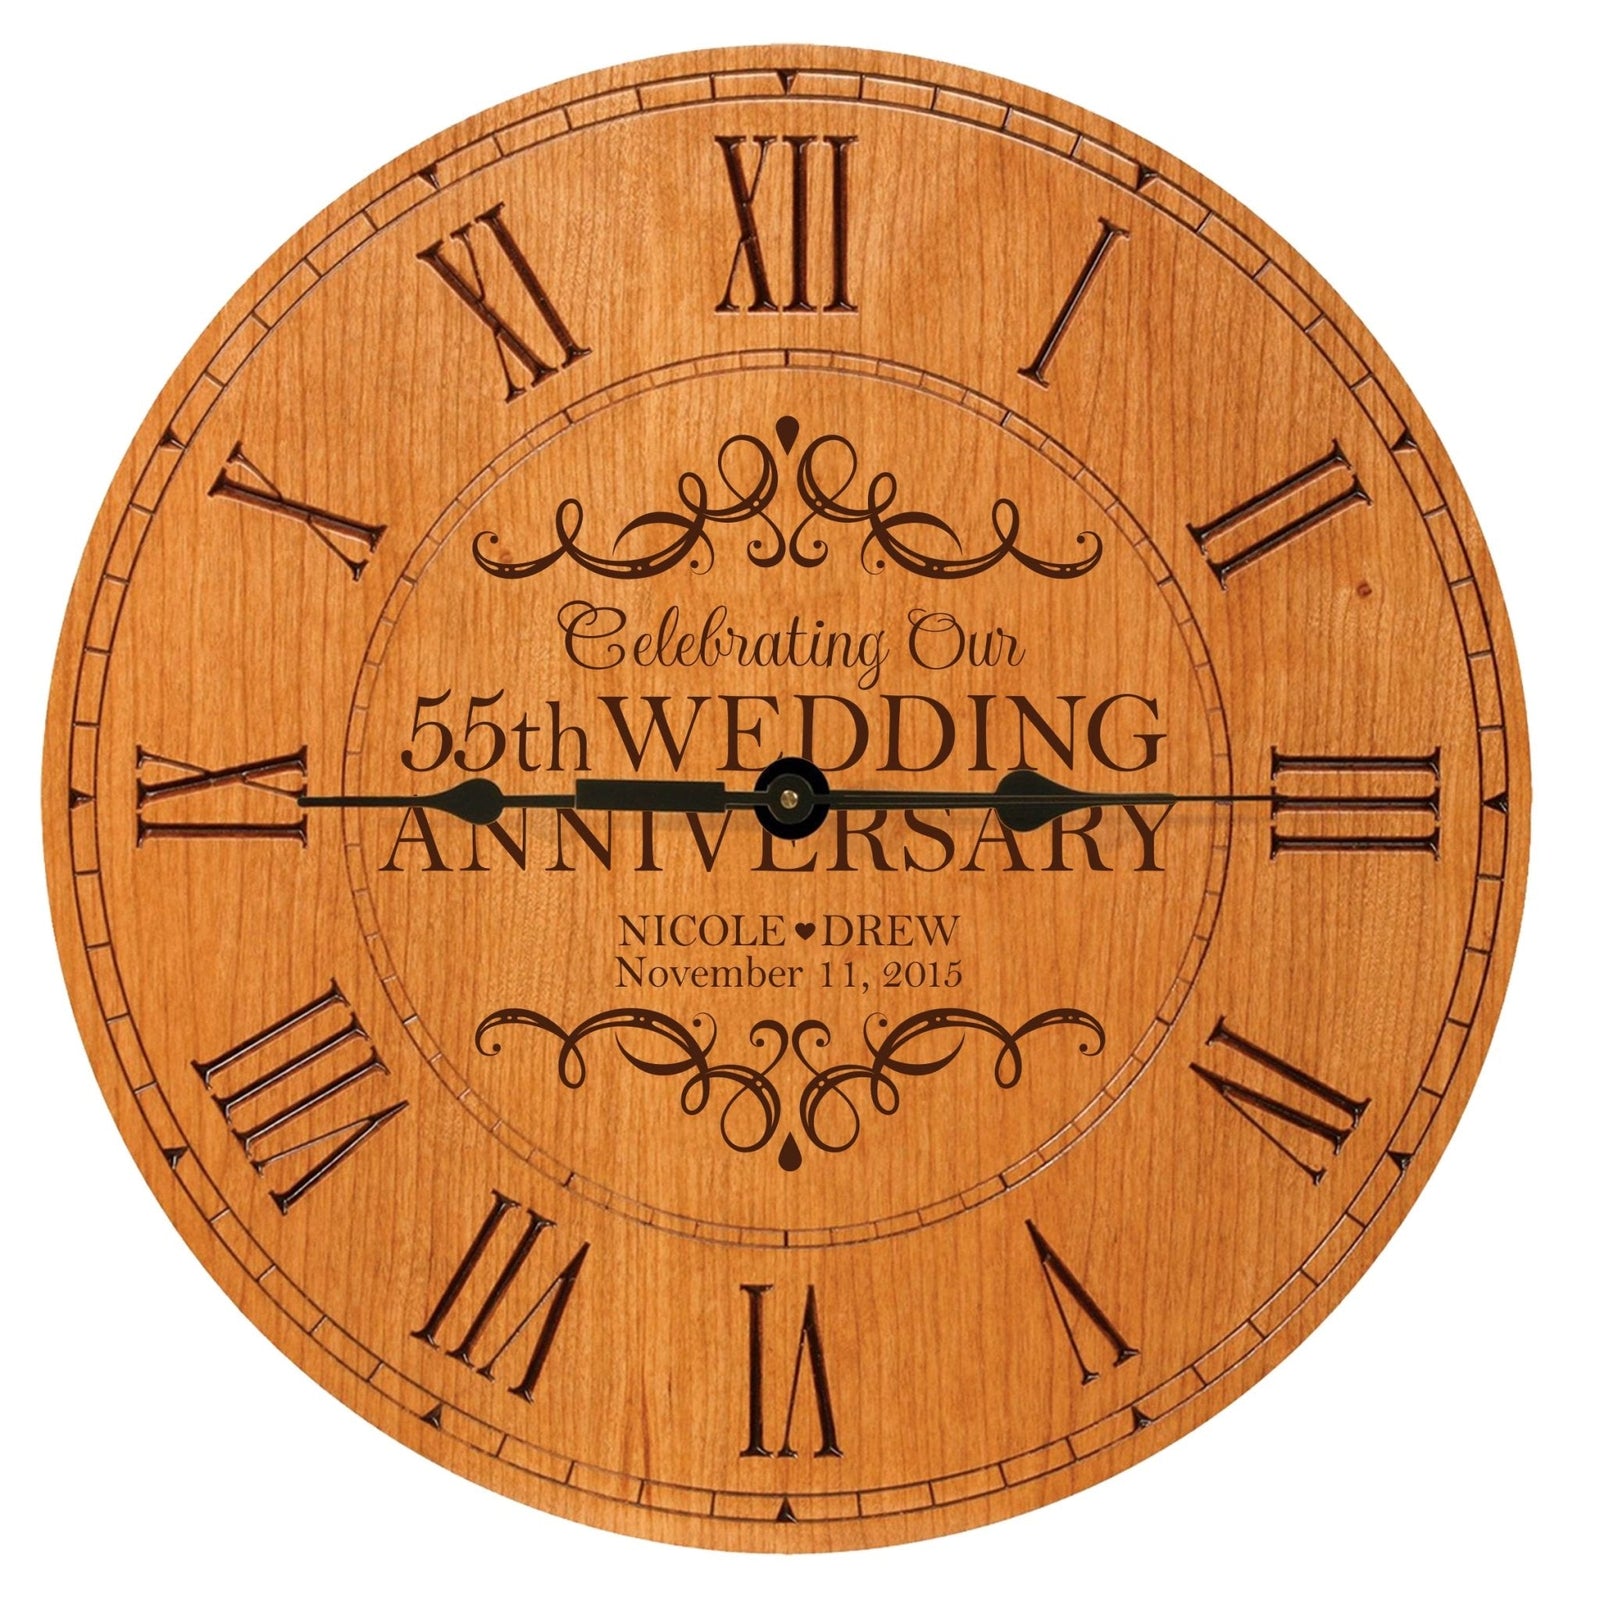 Lifesong Milestones Personalized Engraved Wooden Wall Clock for 55th Wedding Anniversary Gift Ideas